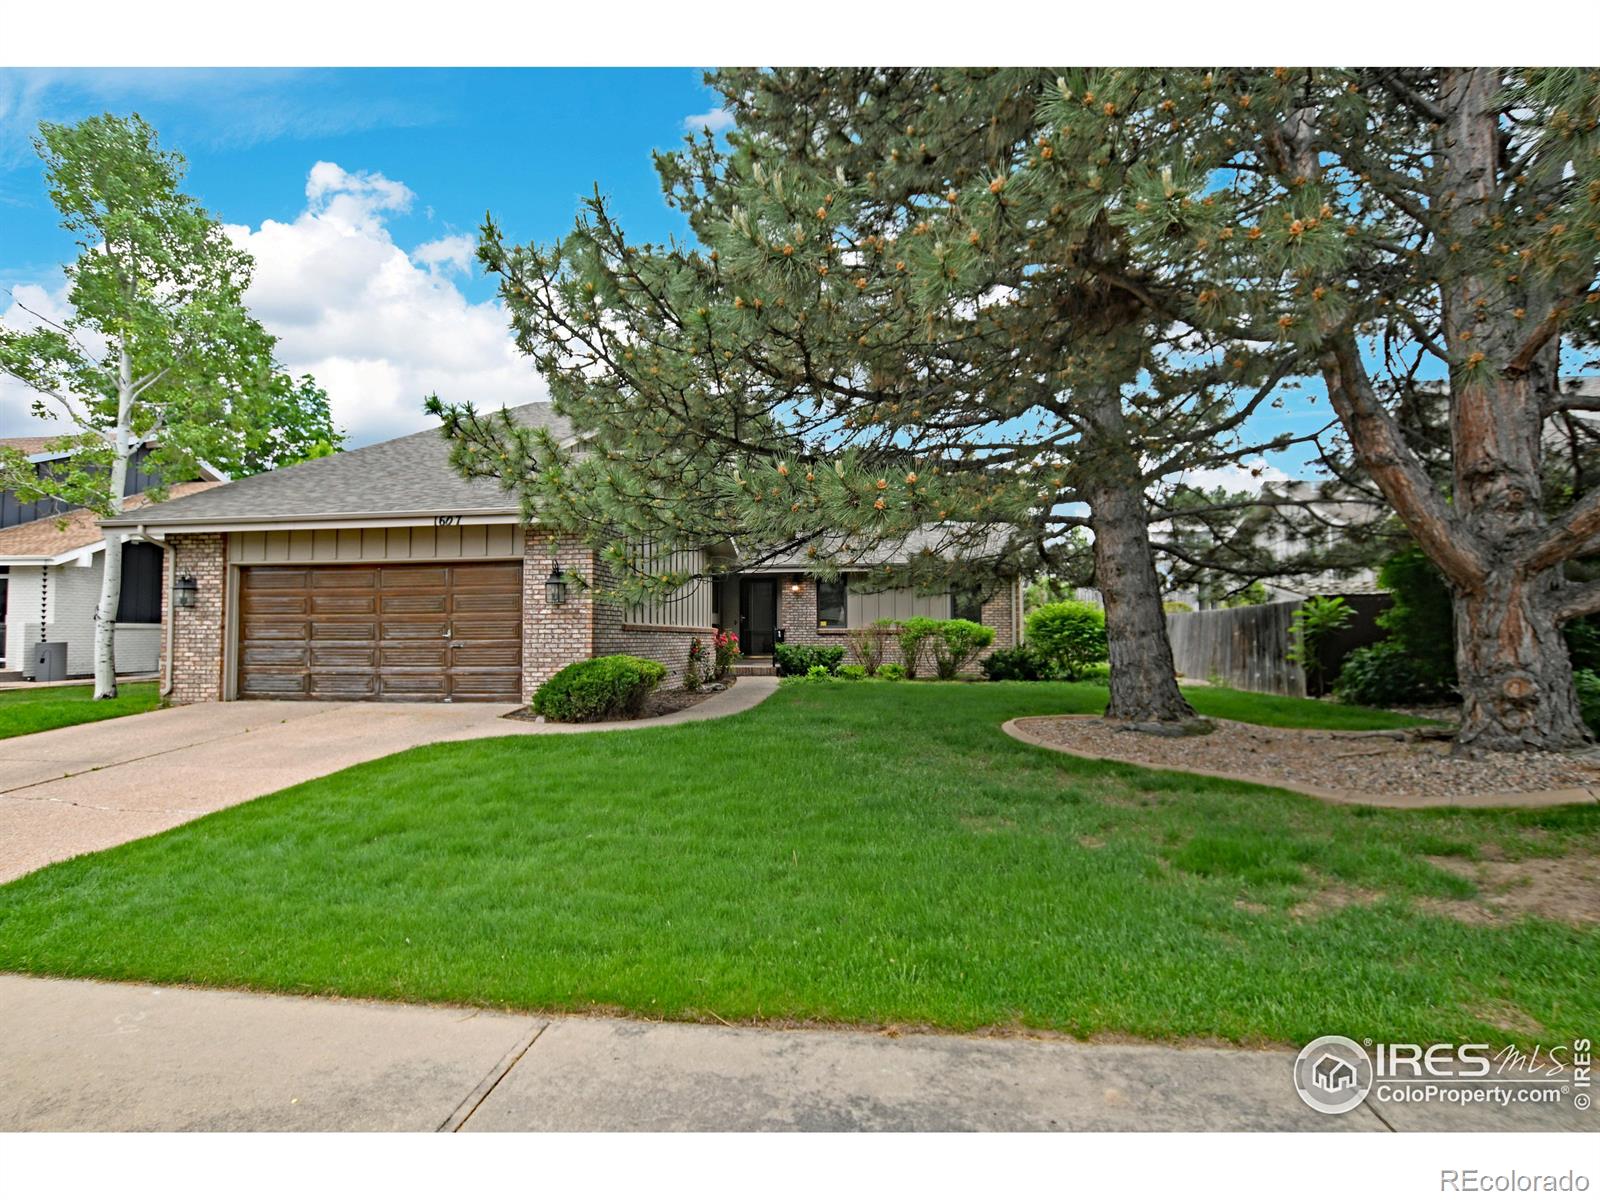 1607  waterford lane, Fort Collins sold home. Closed on 2024-07-19 for $650,000.